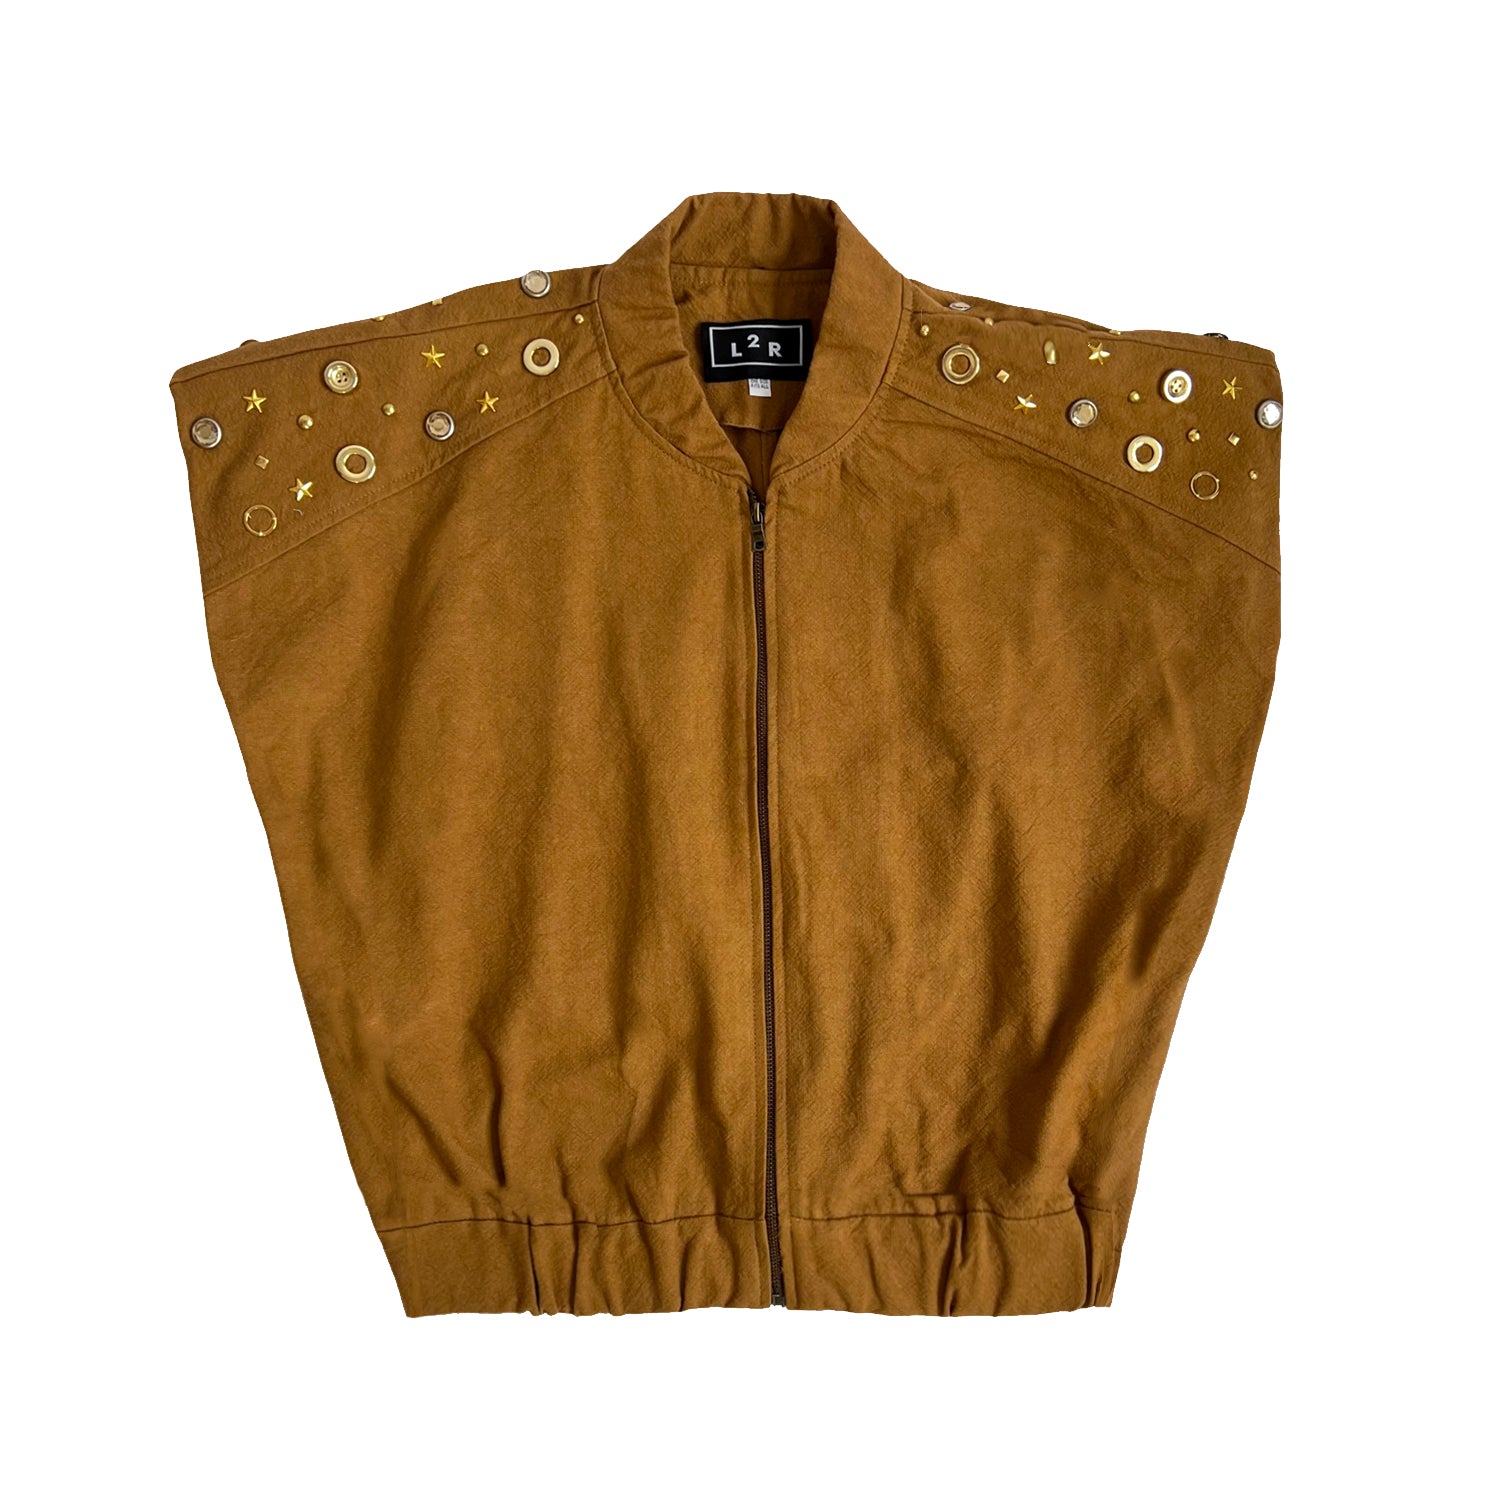 Studded Sleeveless Bomber Jacket in Tan Brown